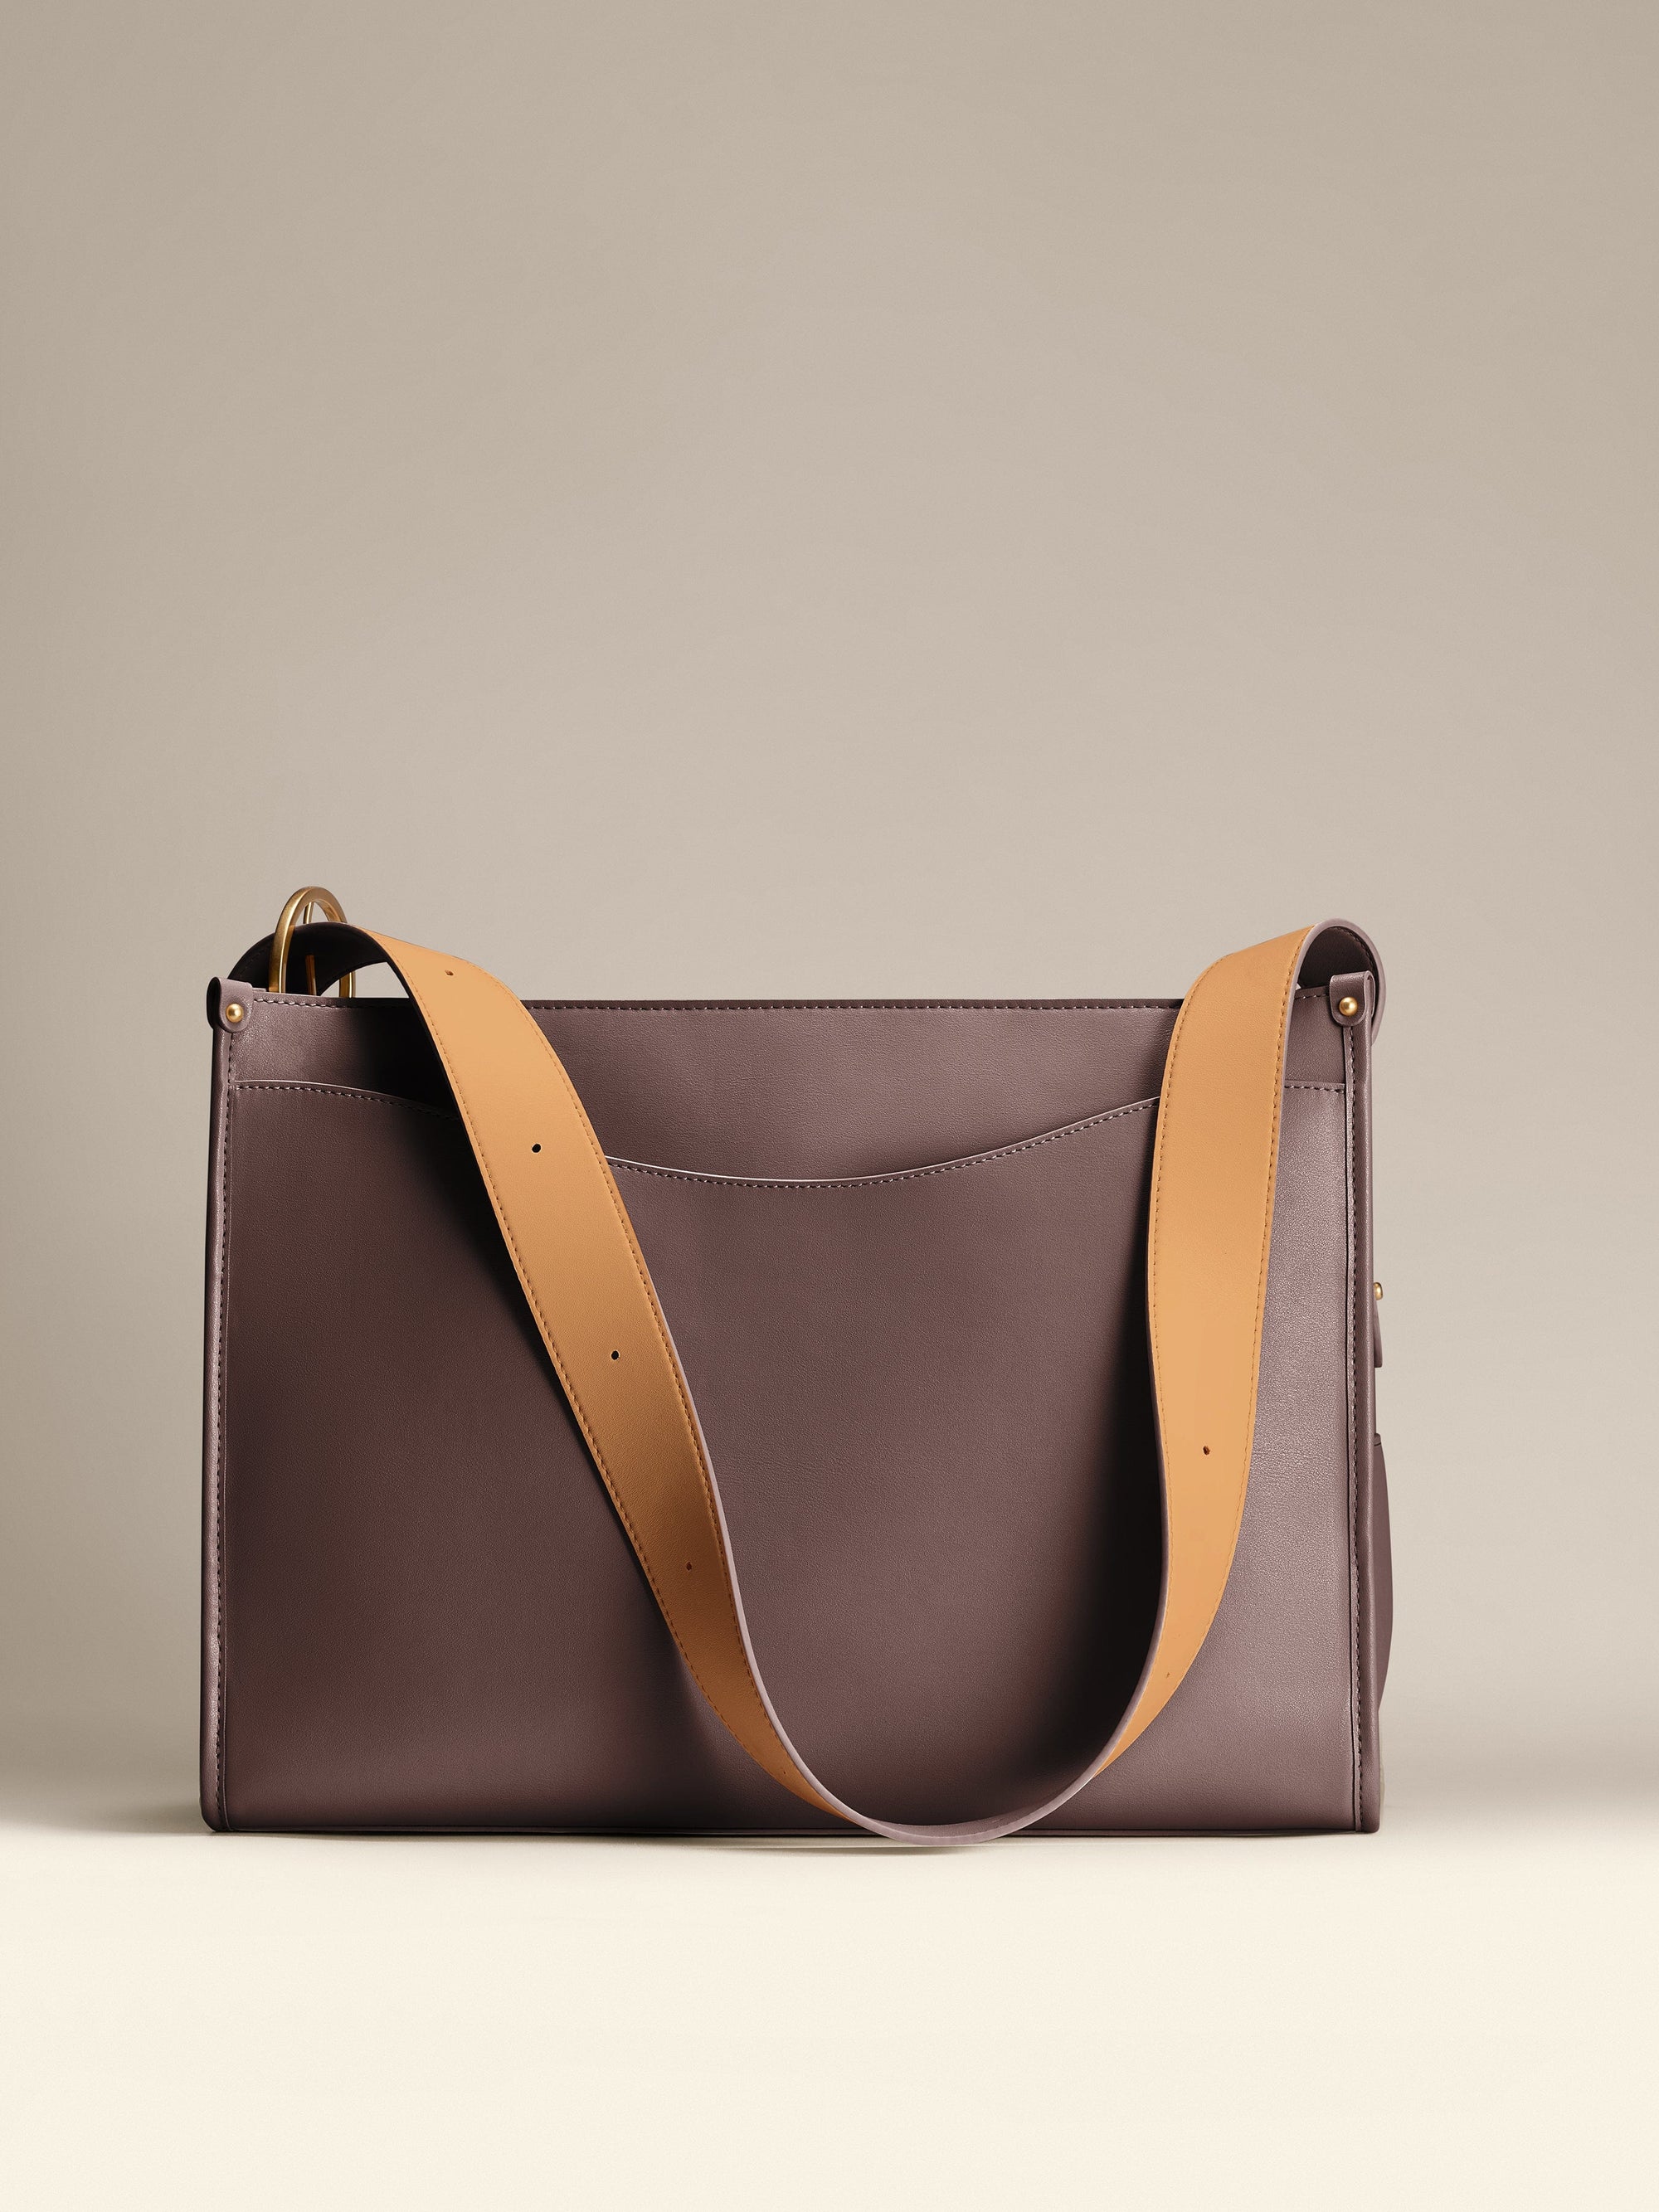 OLEADA Work Tote Bag > Leather Work Tote For Women > Large Capacity Bag > 16 Inch Laptop Bag > Convertible To Shoulder Bag Reverie Tote Chocolate